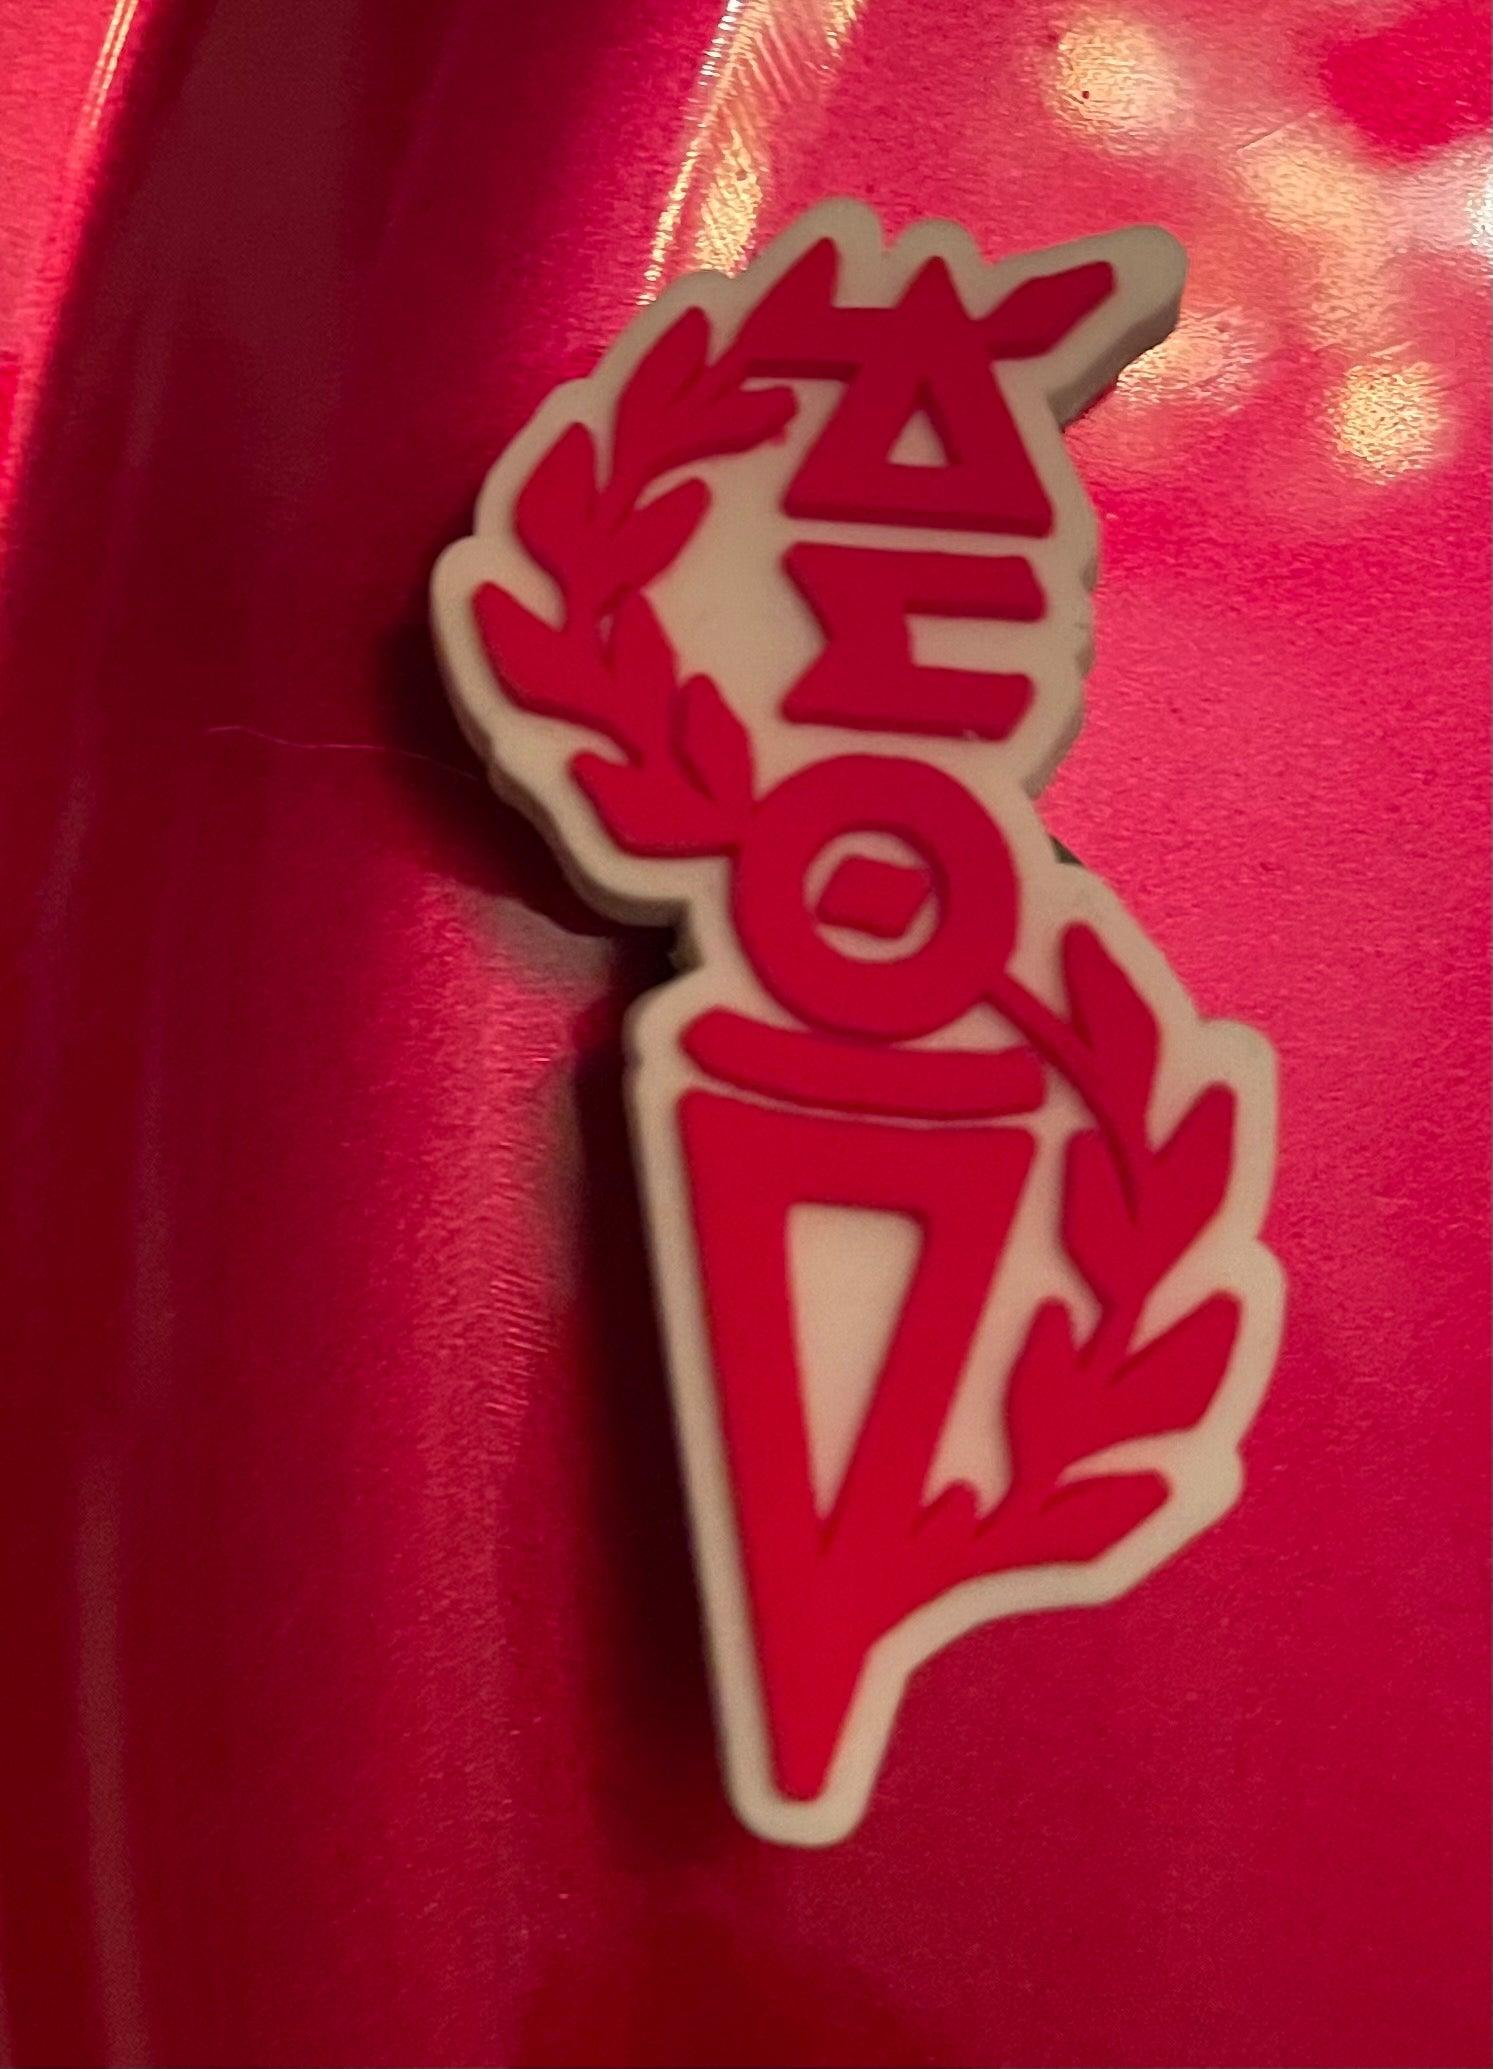 Jibbitz charms and numbers to personalize and to show your Delta pride. CROC-it! OO-OOP - shopsmitees